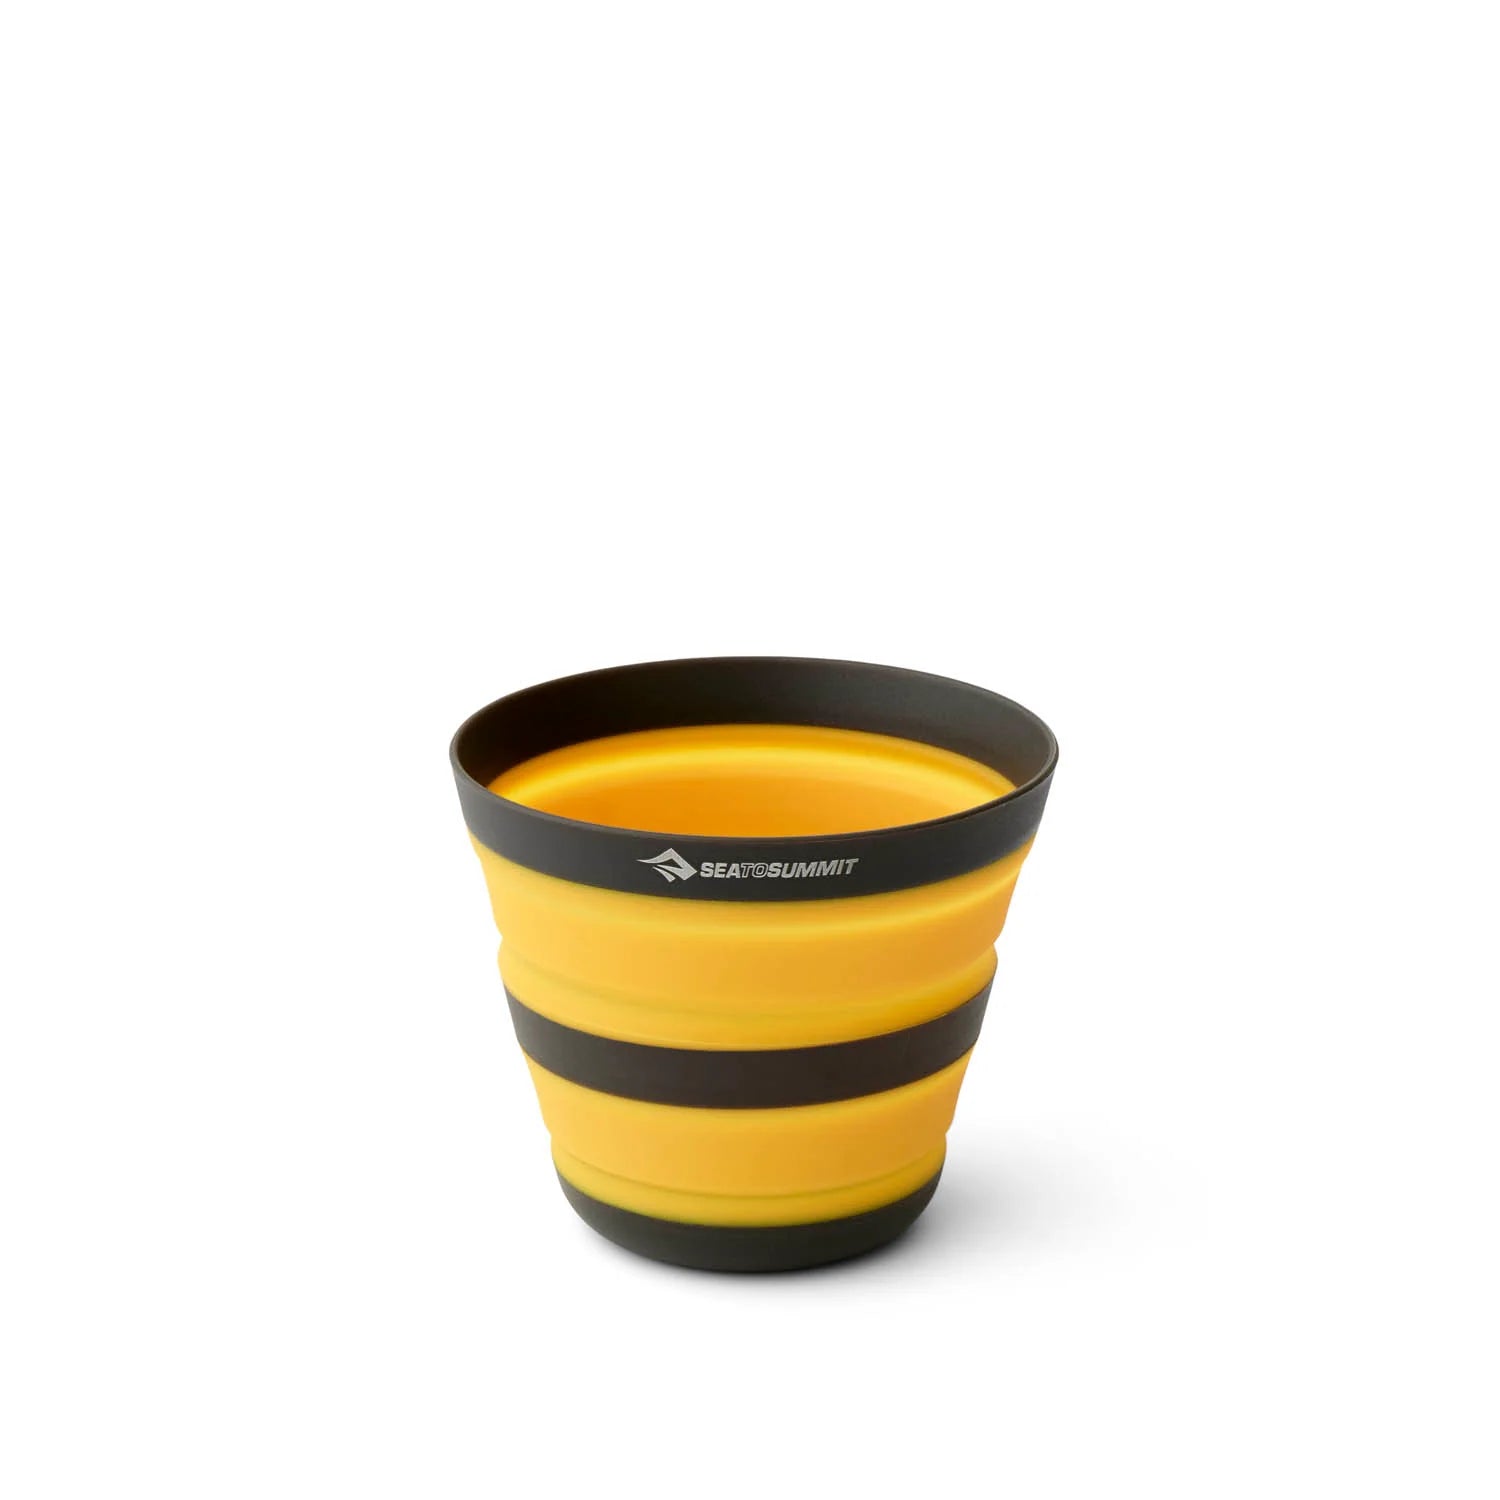 Sea to Summit Frontier UL Collapsible Cup - YELLOW - Mansfield Hunting & Fishing - Products to prepare for Corona Virus